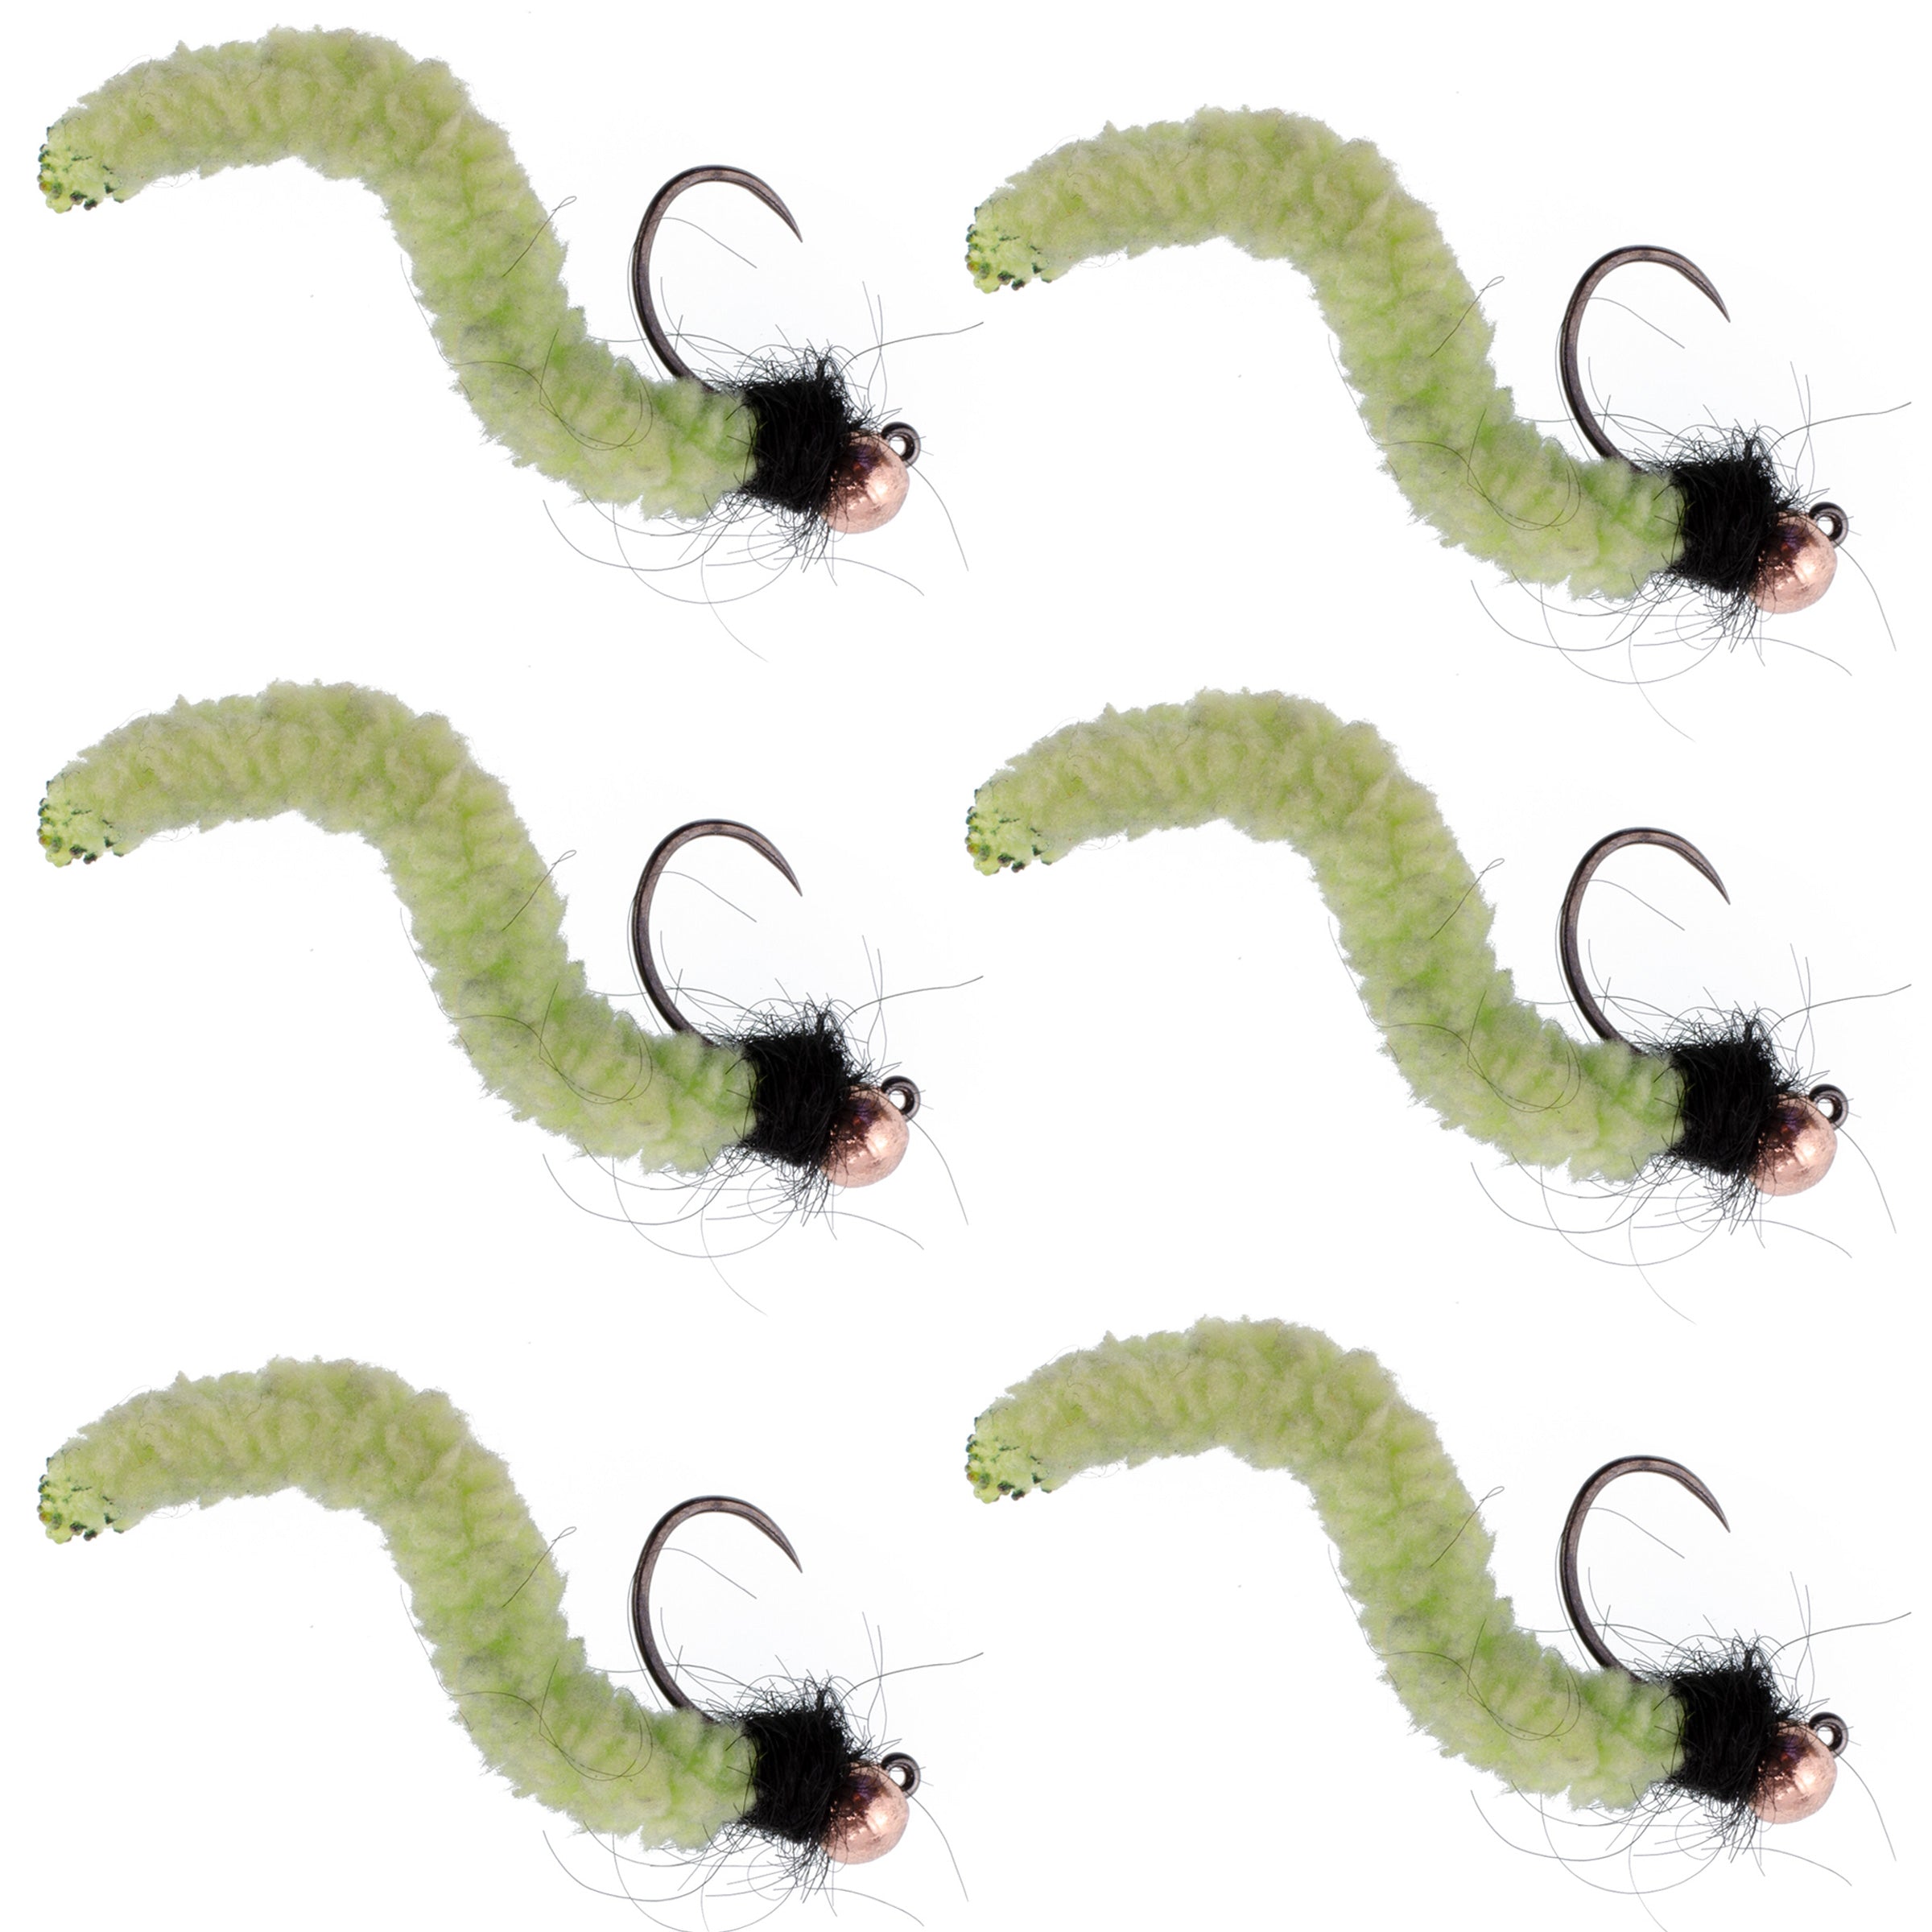 Tungsten Bead Chartreuse Wormy Mop Fly Tactical Jig Czech Euro Nymph Barbless Fly - 6 Flies Size 12